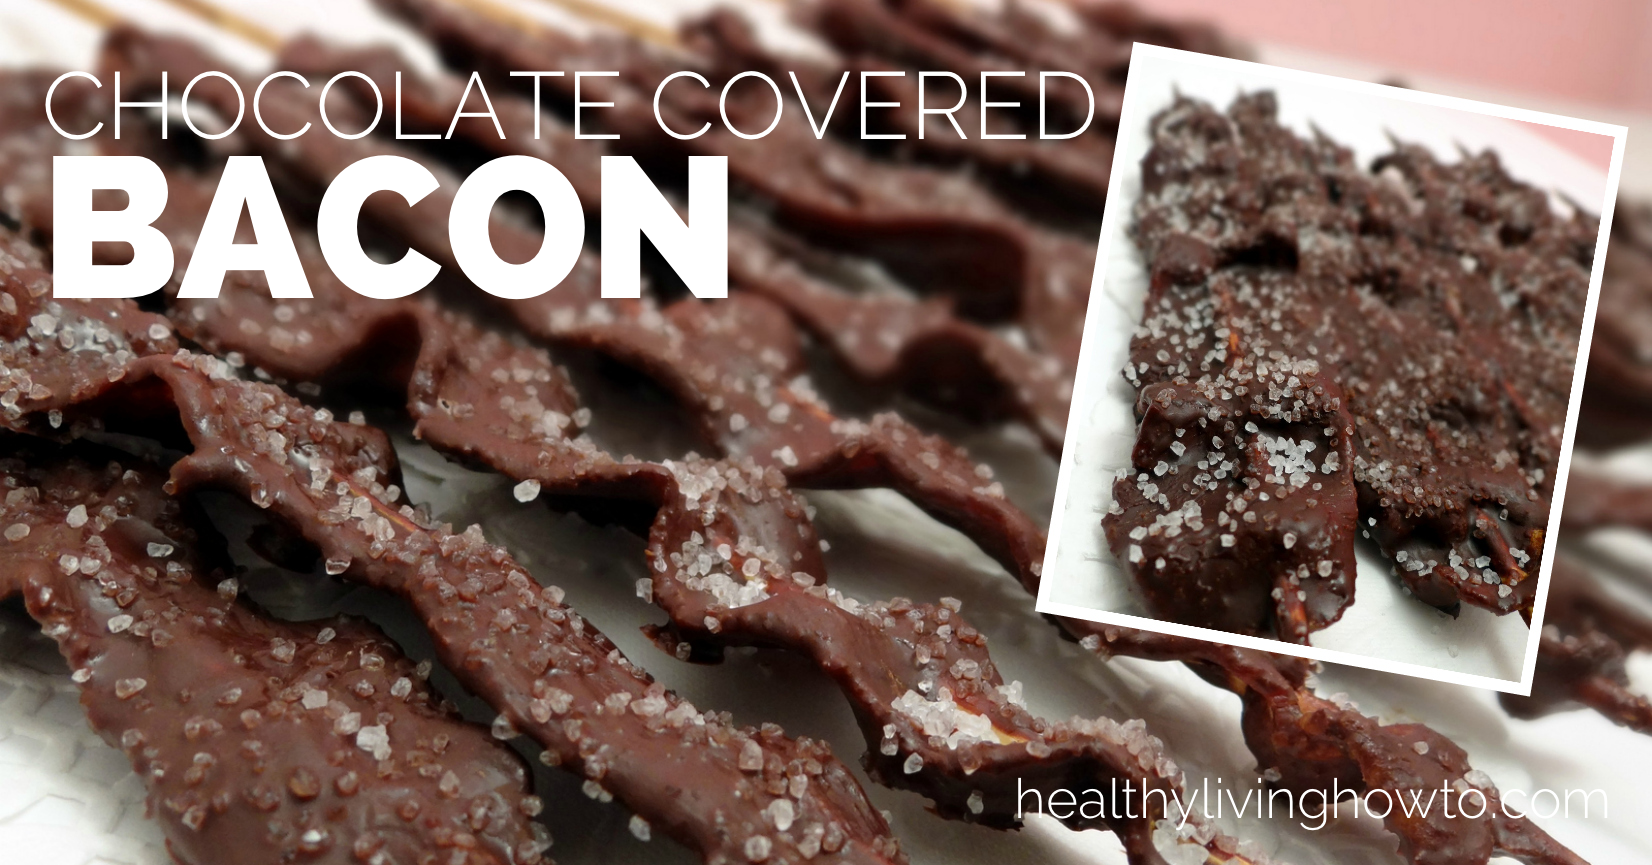 Chocolate-Covered-Bacon-Featured-Image.png